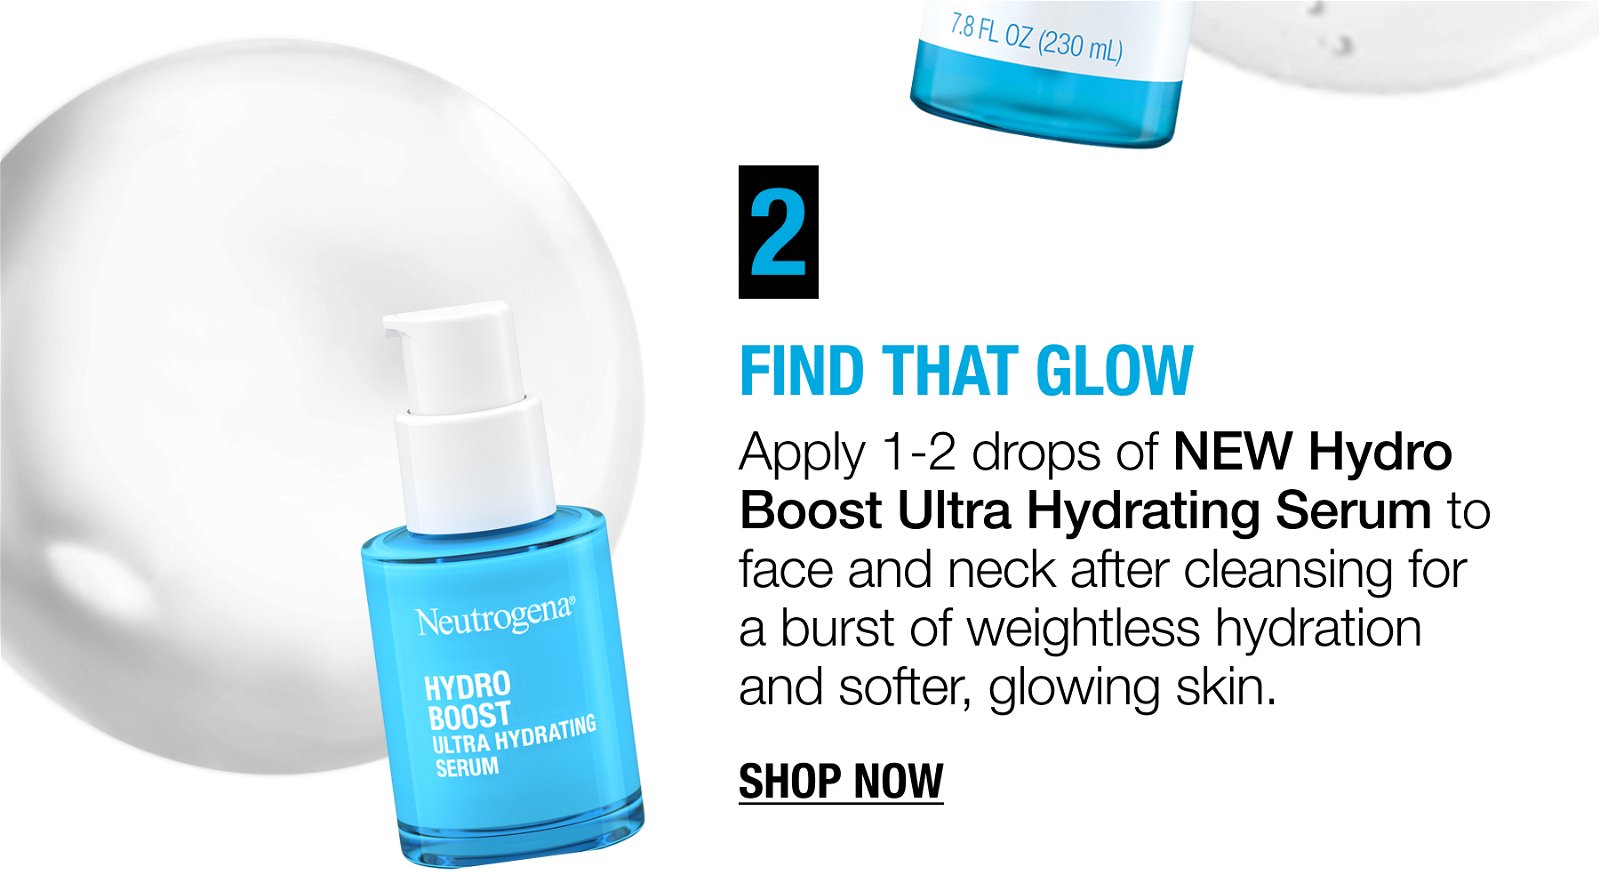 2 Find That Glow - Shop Now